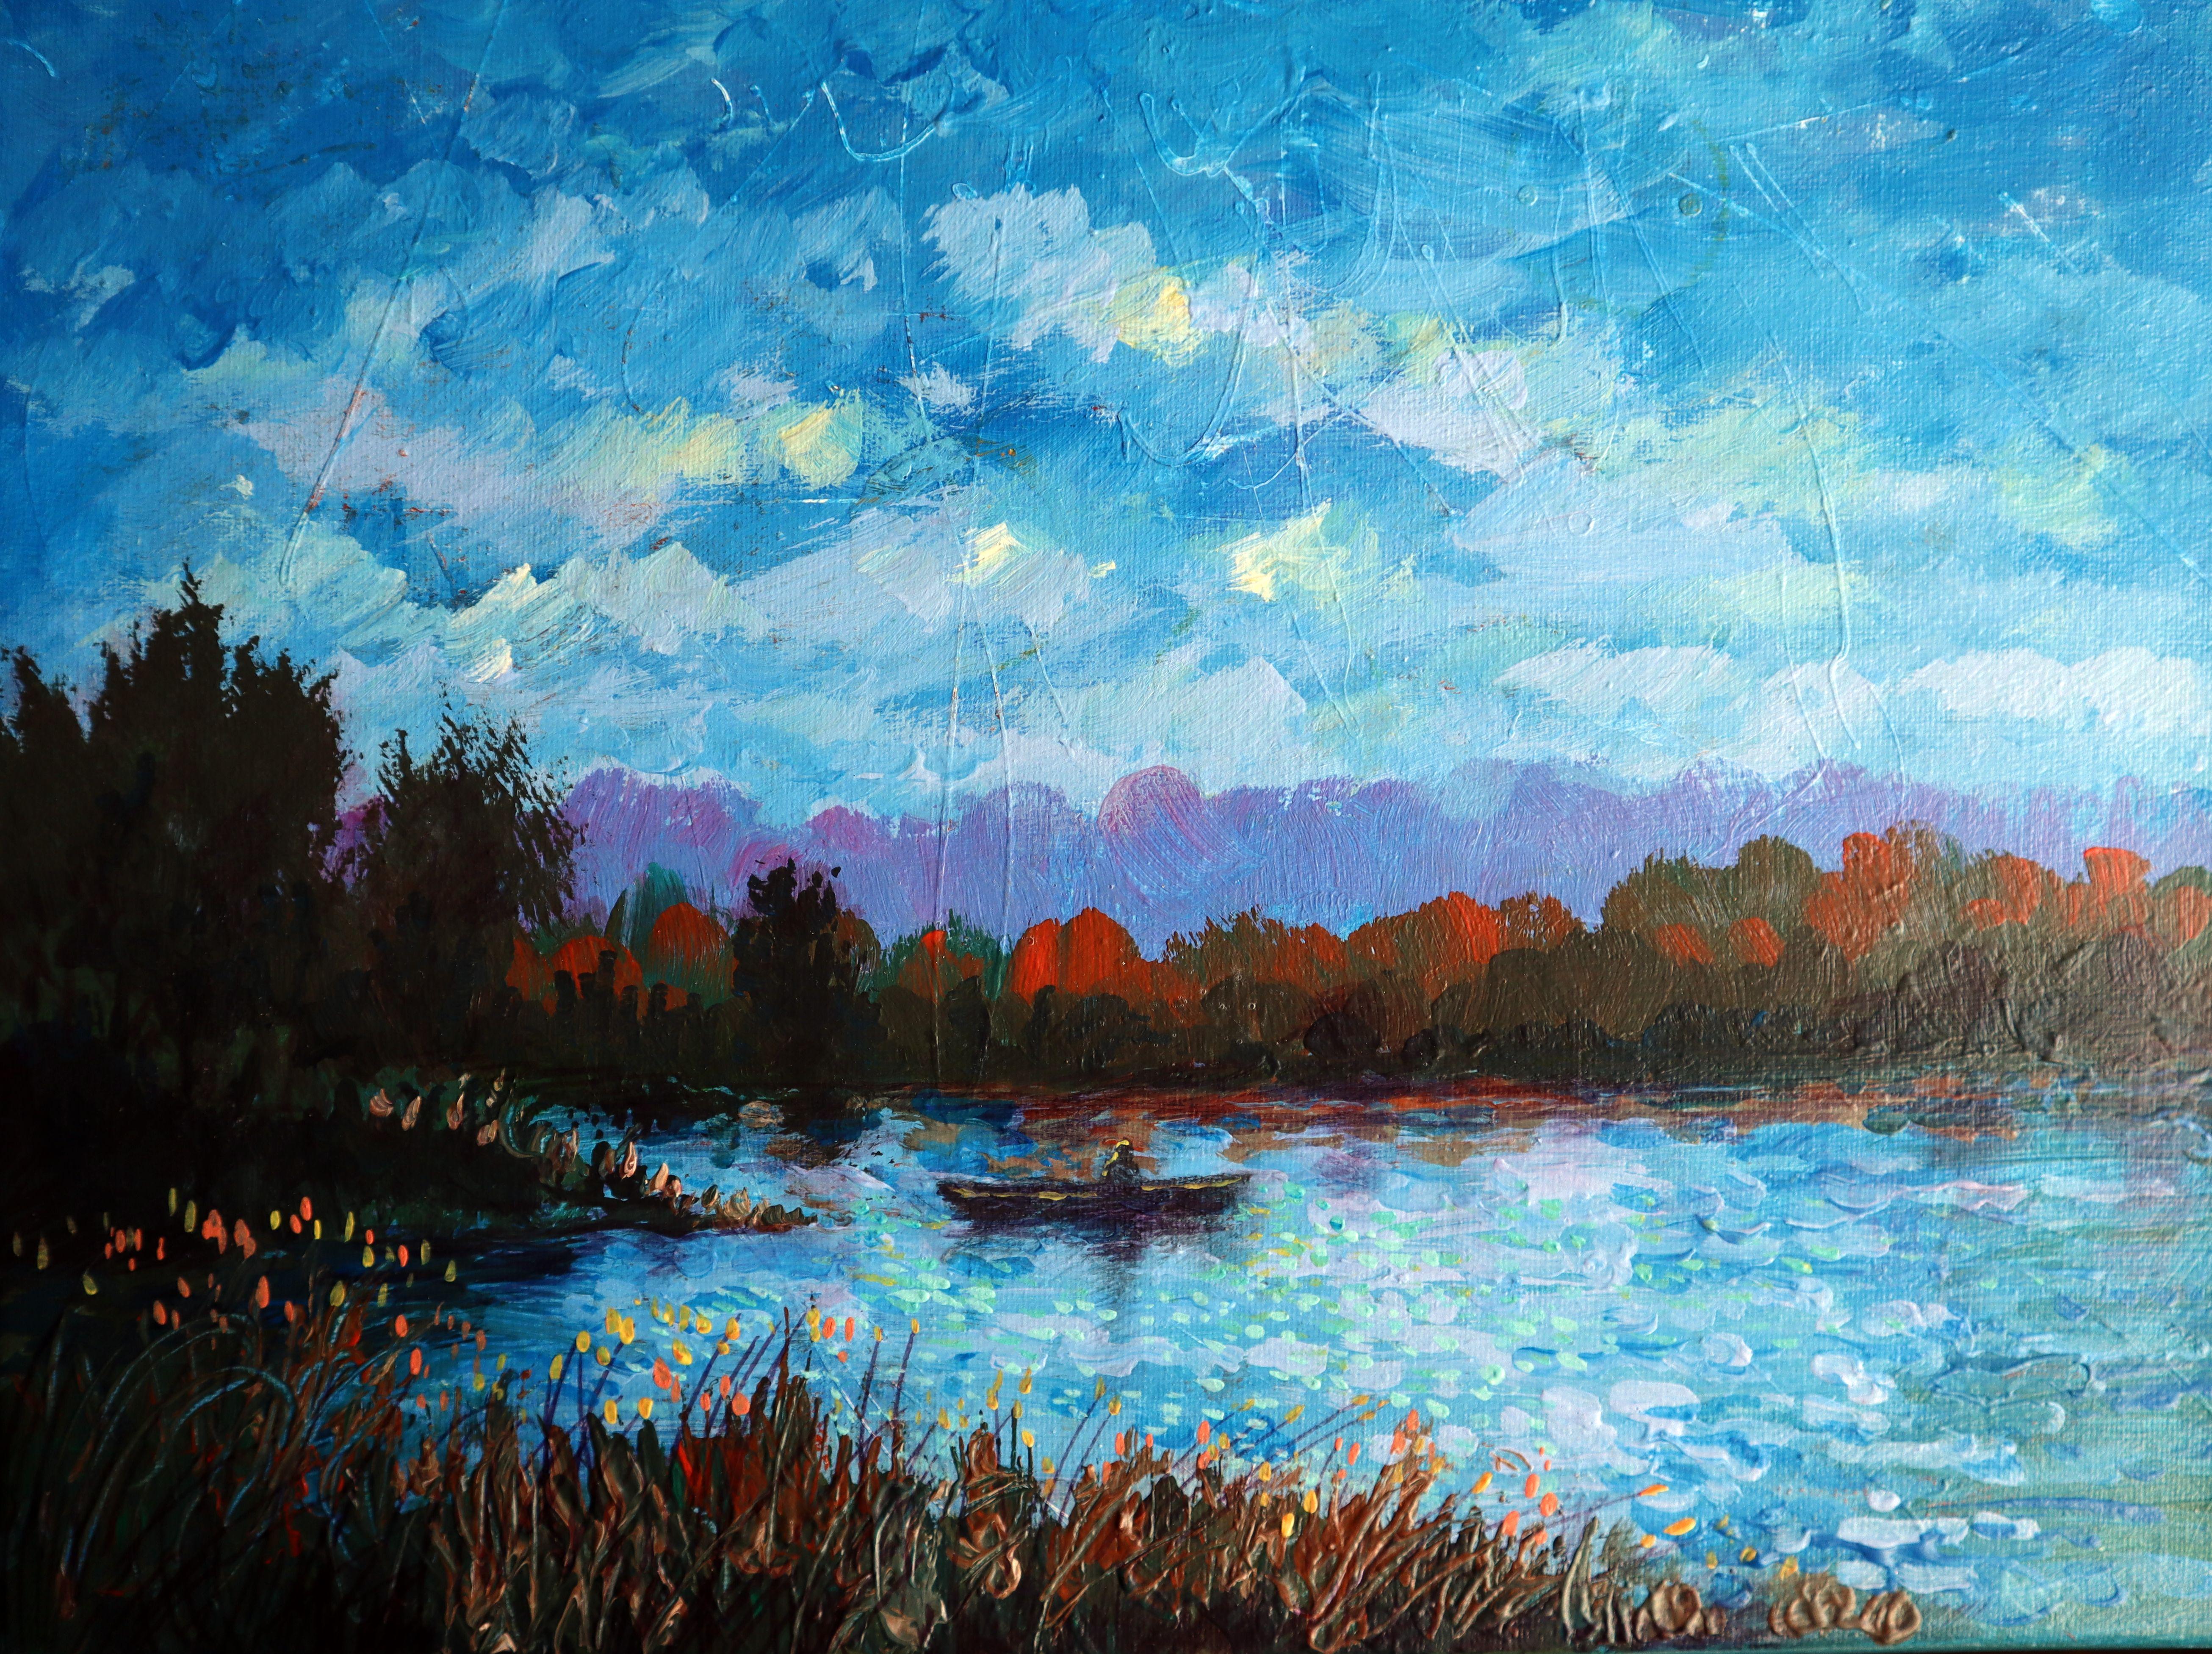 In this vibrant blend of expressionism and impressionism, I've melded acrylic and oil to capture the serene yet dynamic essence of nature. The strokes convey a rich tapestry of textures, while the hues evoke the rhythms of the natural world. It's a